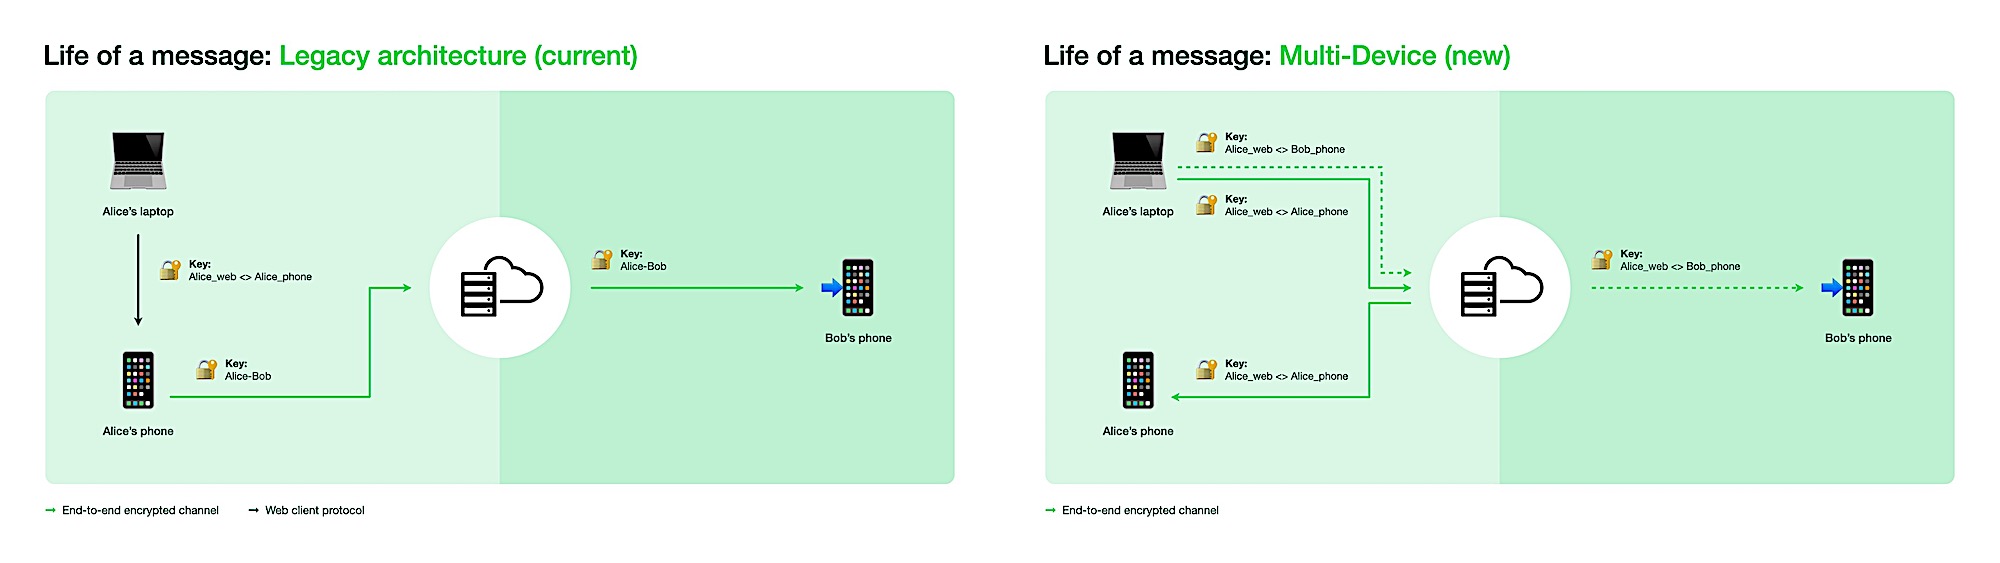 whatsapp is testing multi device support that works without the phone